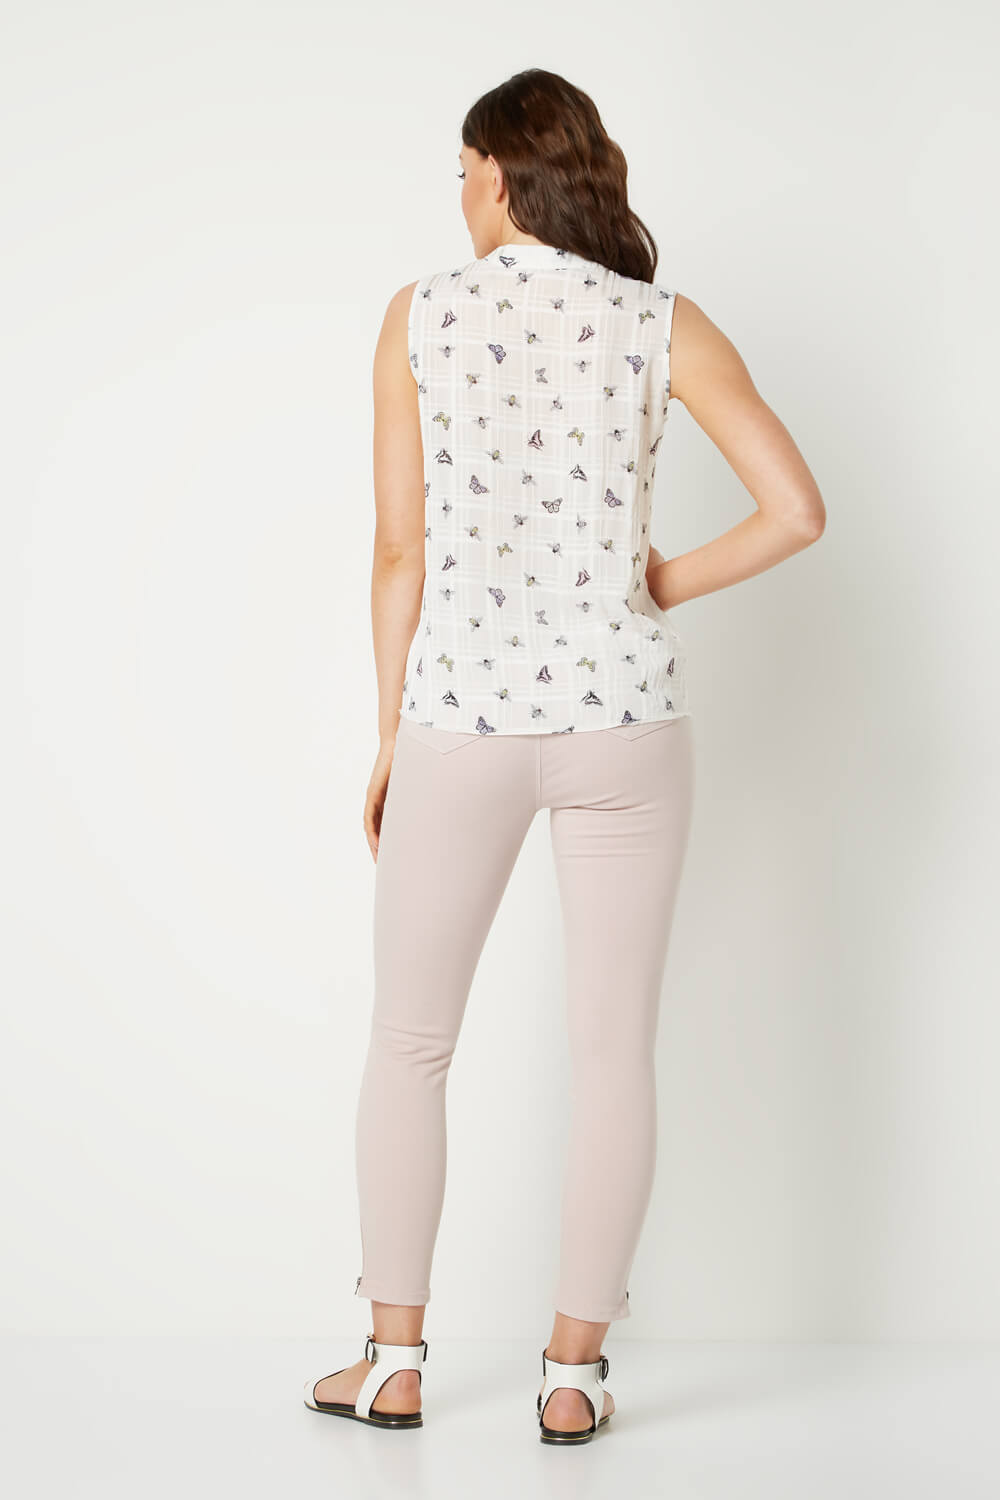 Ivory  Butterfly and Bee Sleeveless Wrap Top, Image 2 of 4